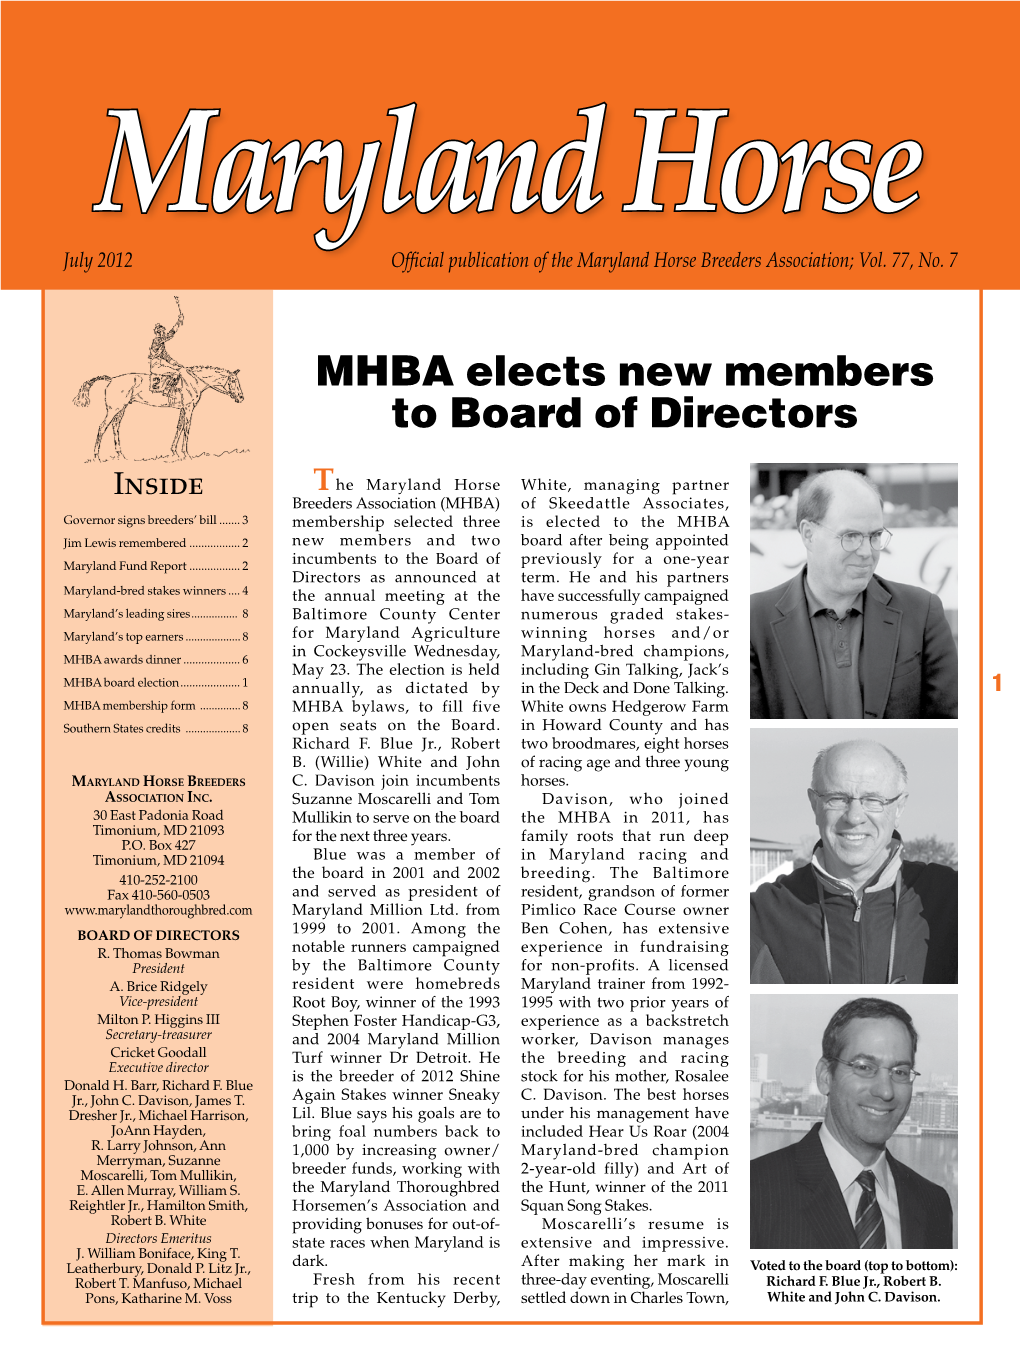 MHBA Elects New Members to Board of Directors